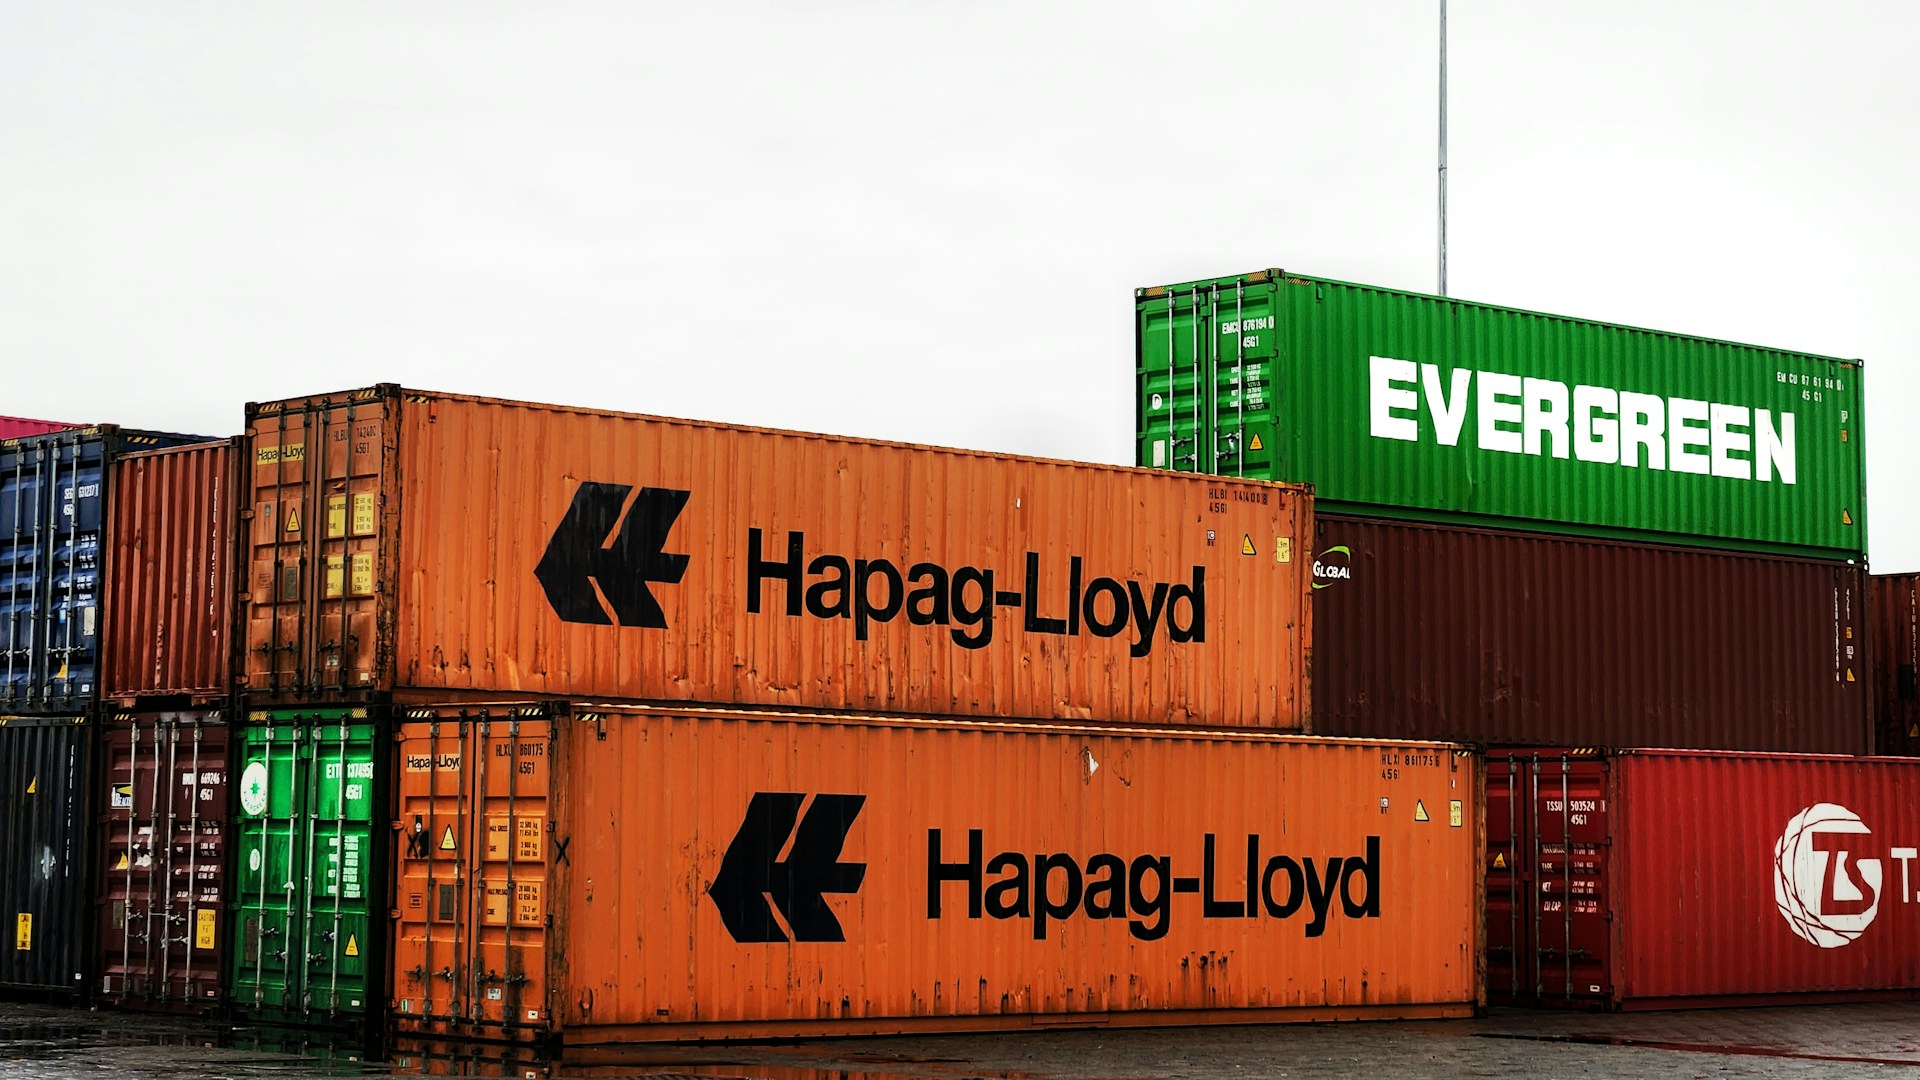 Hapag-Lloyd and Evergreen shipping containers